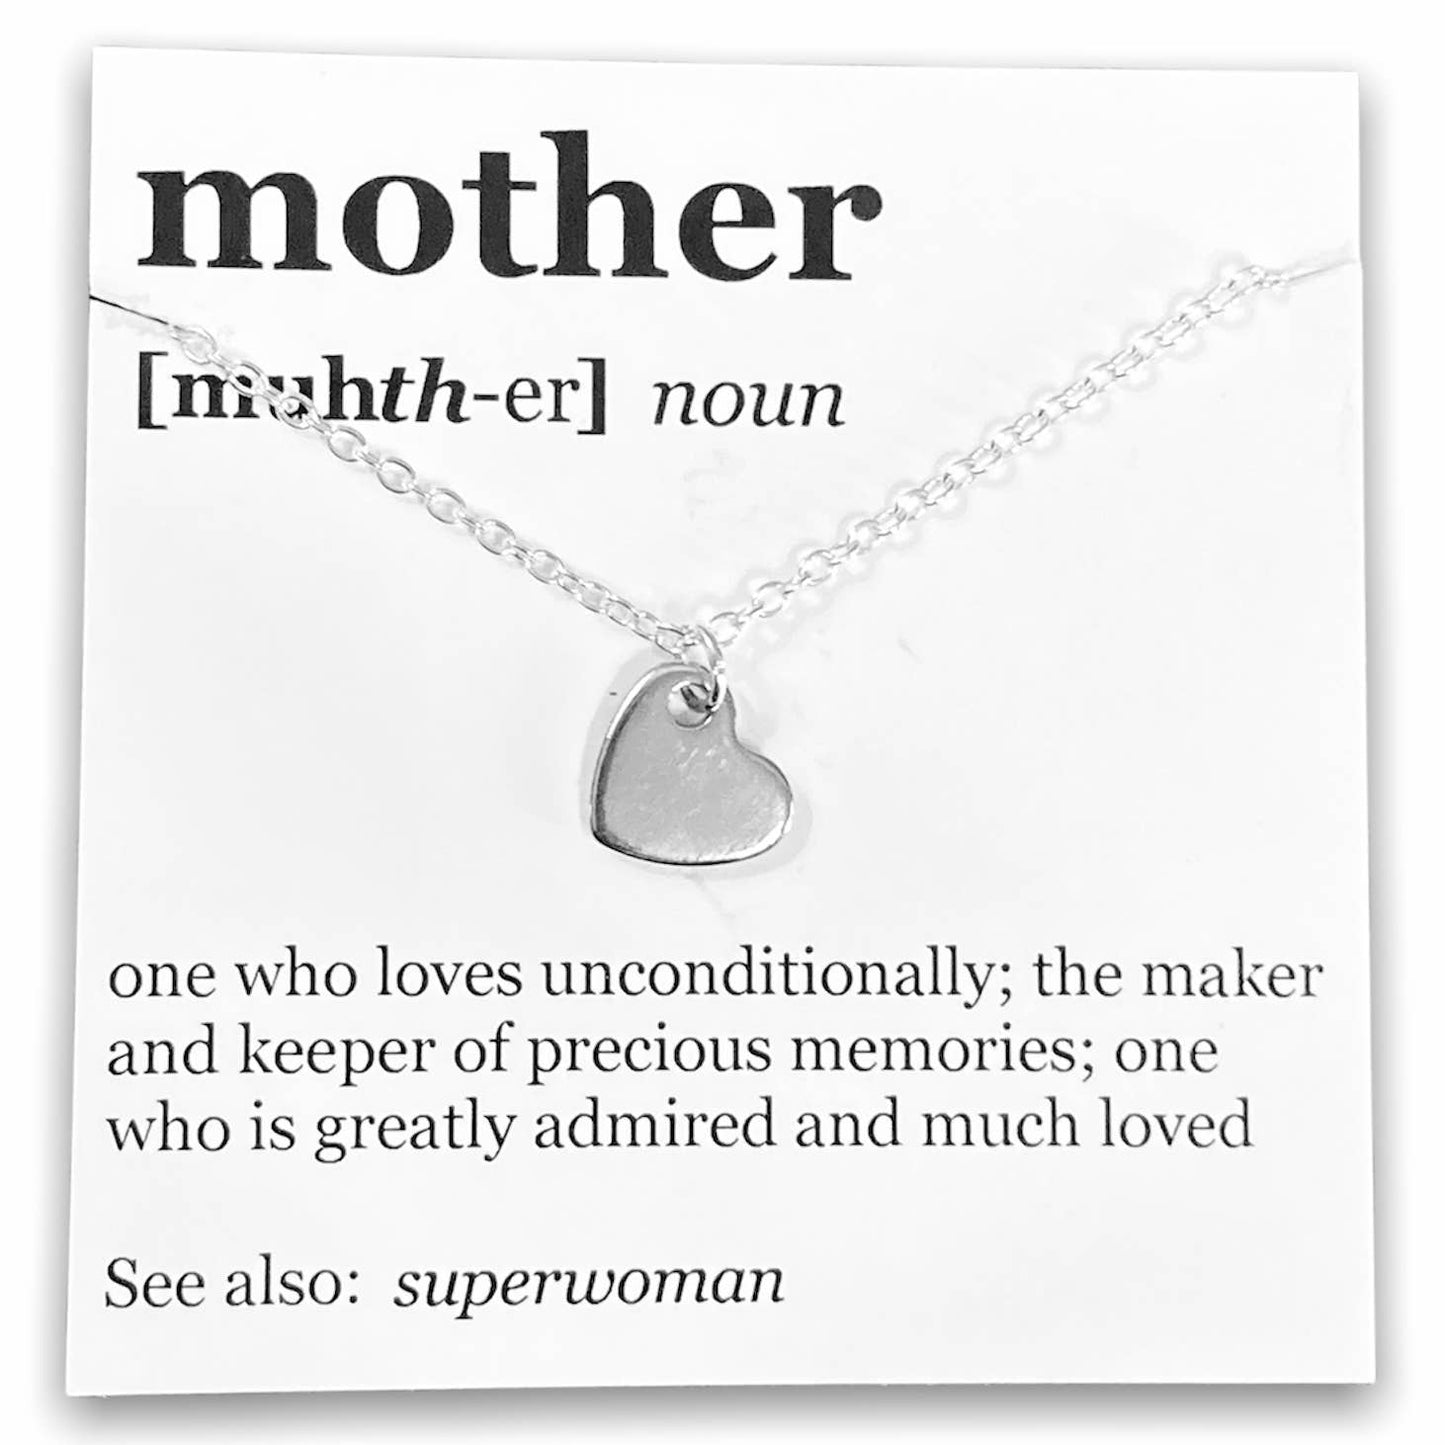 Mother's Day Pendant Necklace on "Mother" Dictionary Card